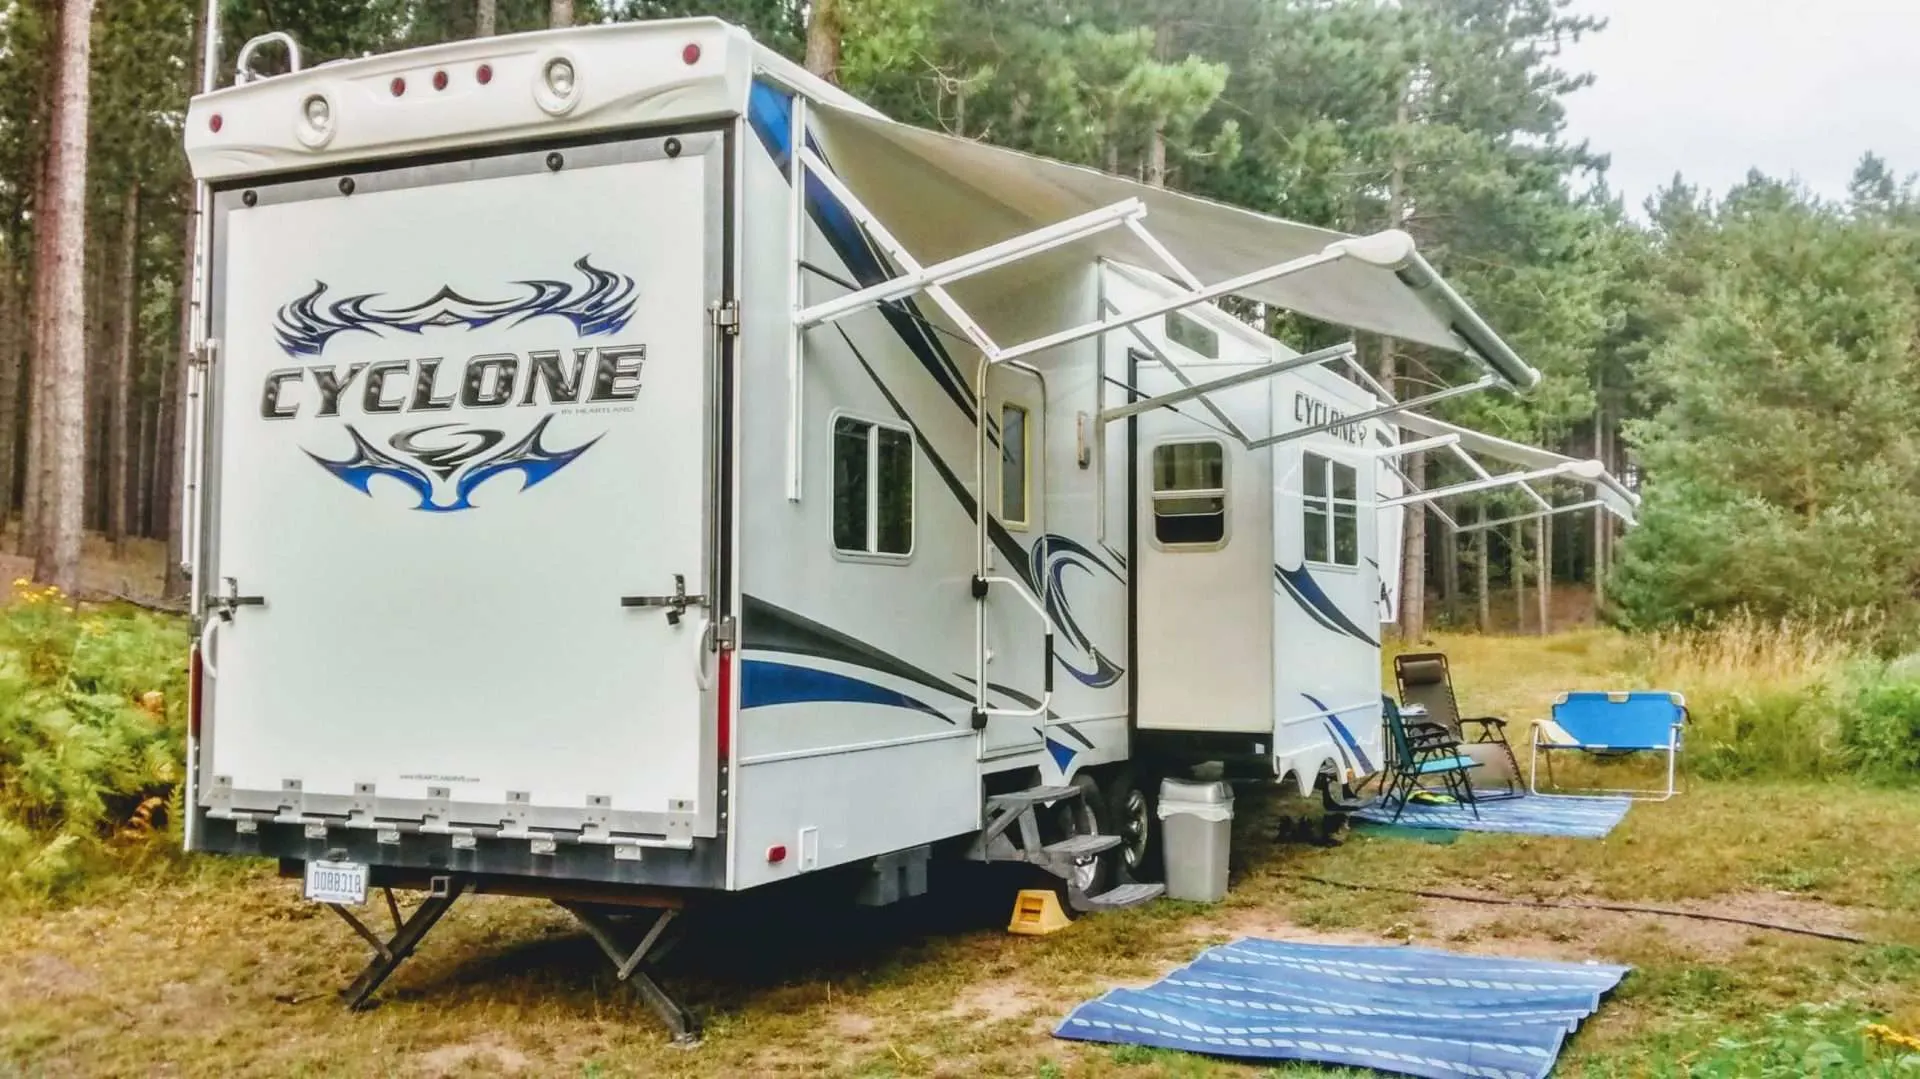 Fifth wheel toy hauler parked at campsite